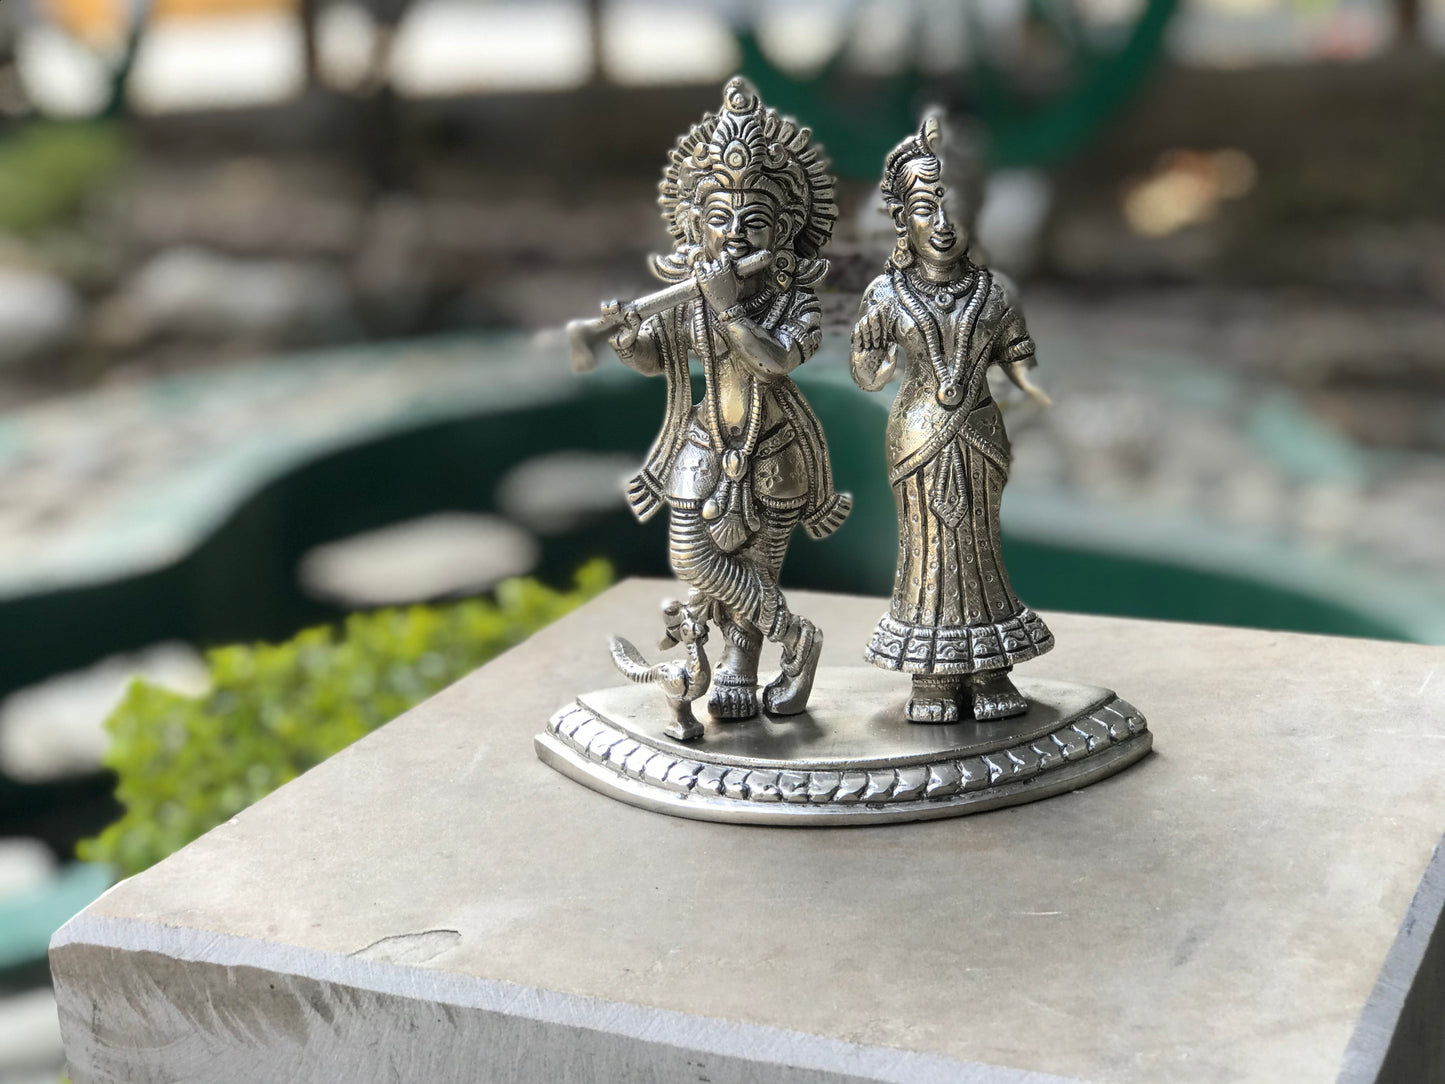 Image of Elegant and Traditional Brass Radha Krishna in Silver Finish.  The Source India is an Indian Handicraft, Home Decor, Furnishing and Textiles Store. Based out of Hauz Khas Village New Delhi, each piece is carefully procured to allow the enhancement of India's Culture.